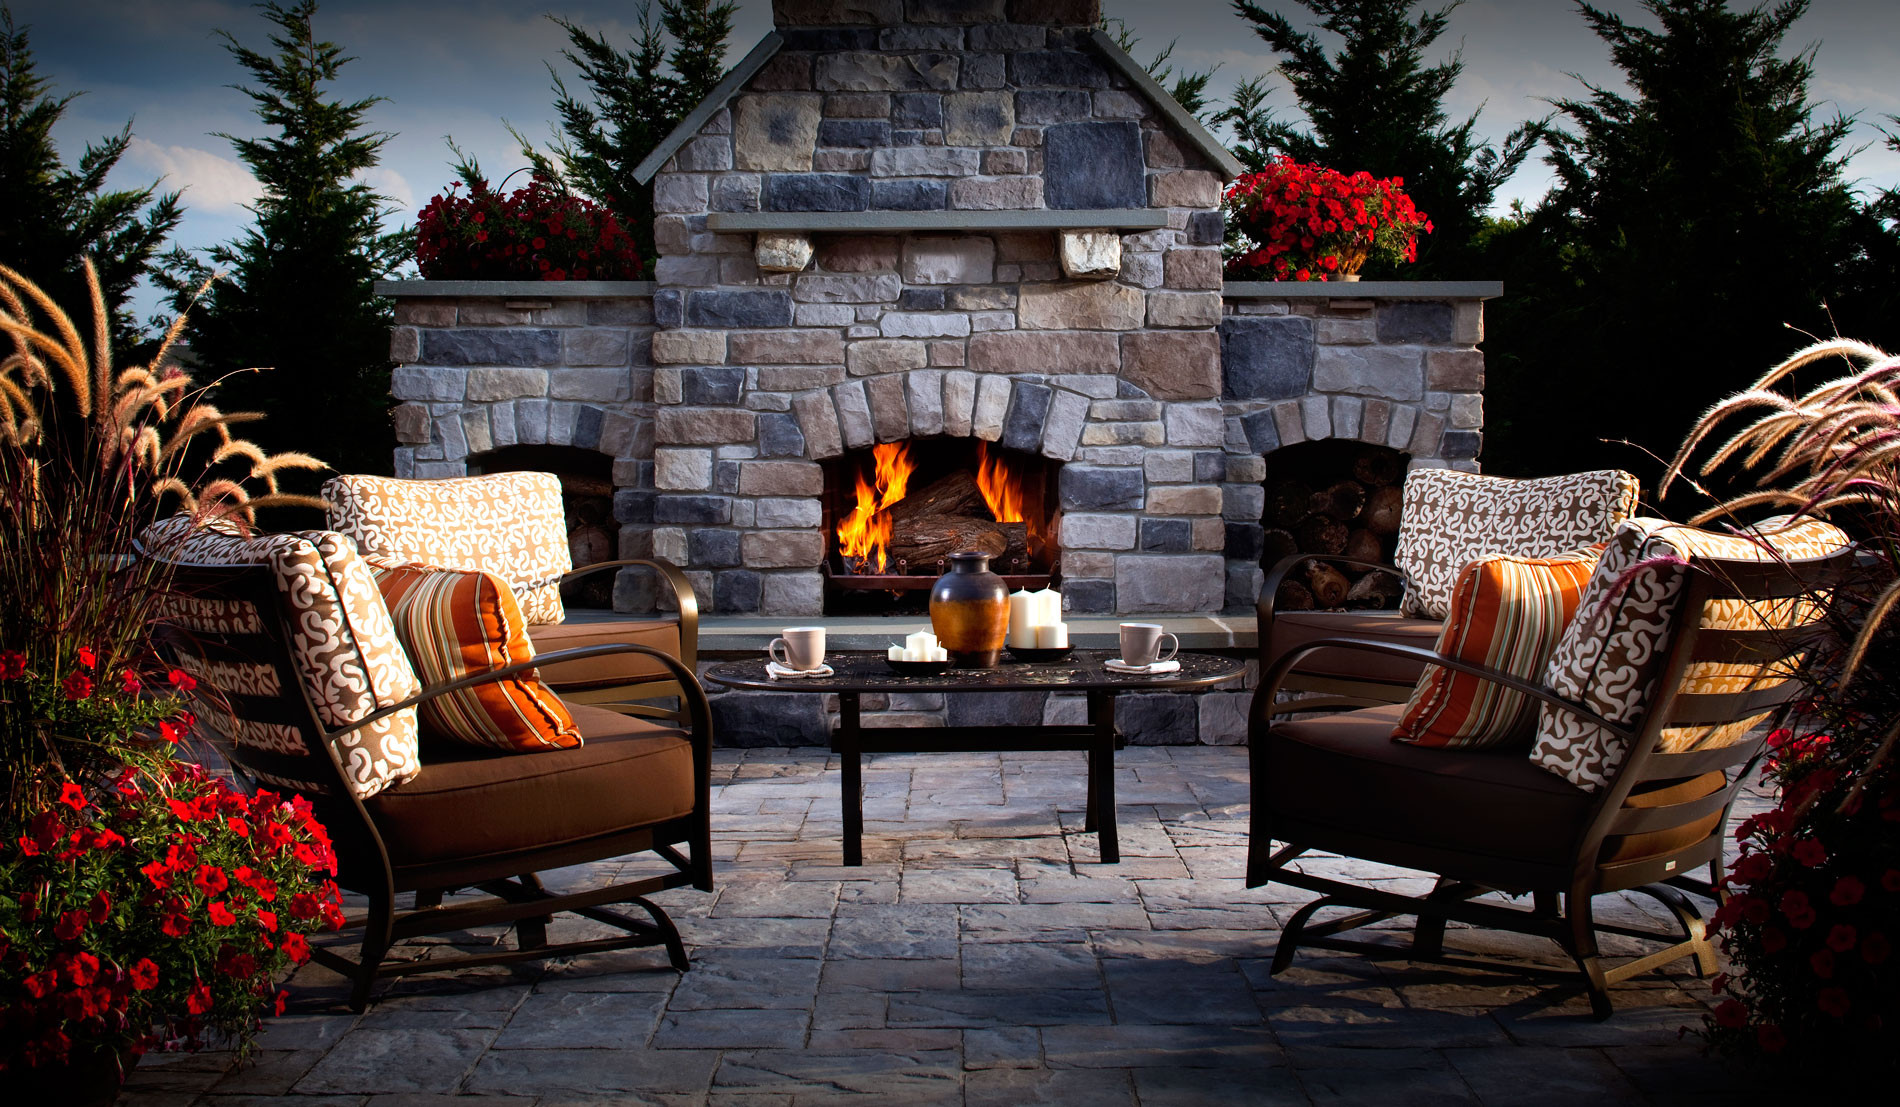 Outdoor Fireplace Or Fire Pit
 Fire Pits and Outdoor Fireplaces